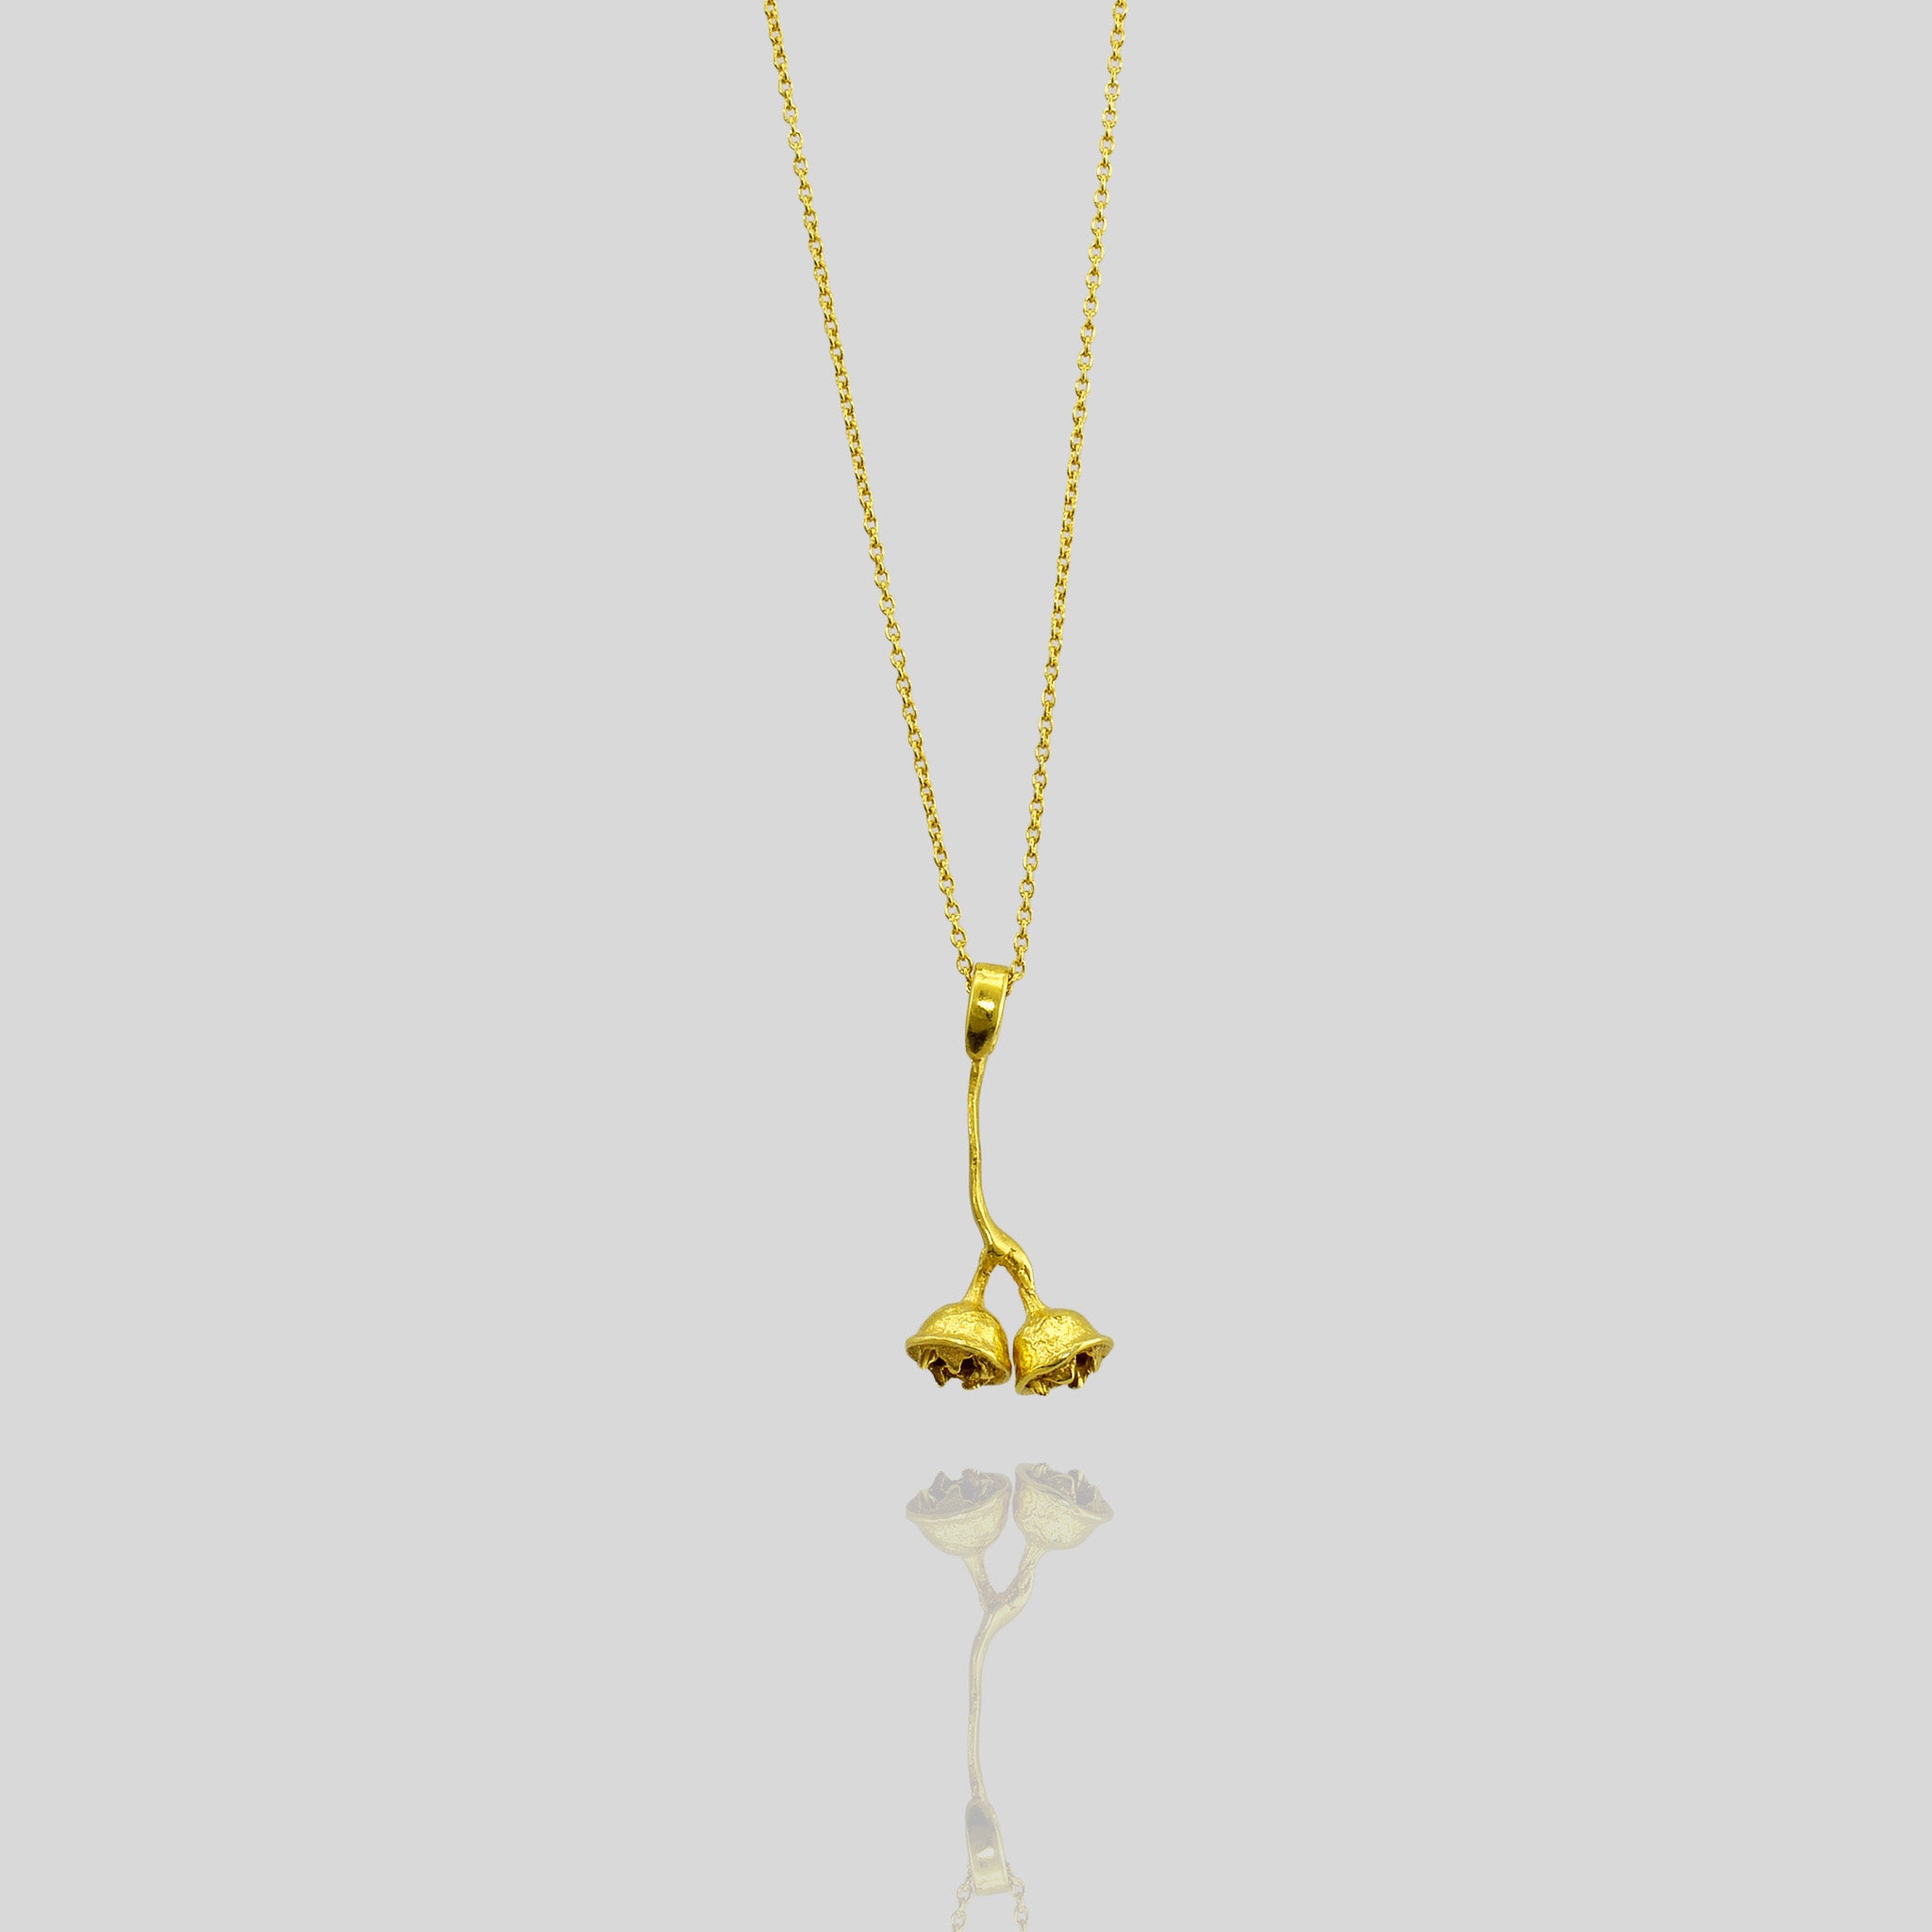 18k Gold necklace modeled after a eucalyptus branch, featuring two detailed dried seed pods, offering a realistic and natural look, ideal for everyday wear.